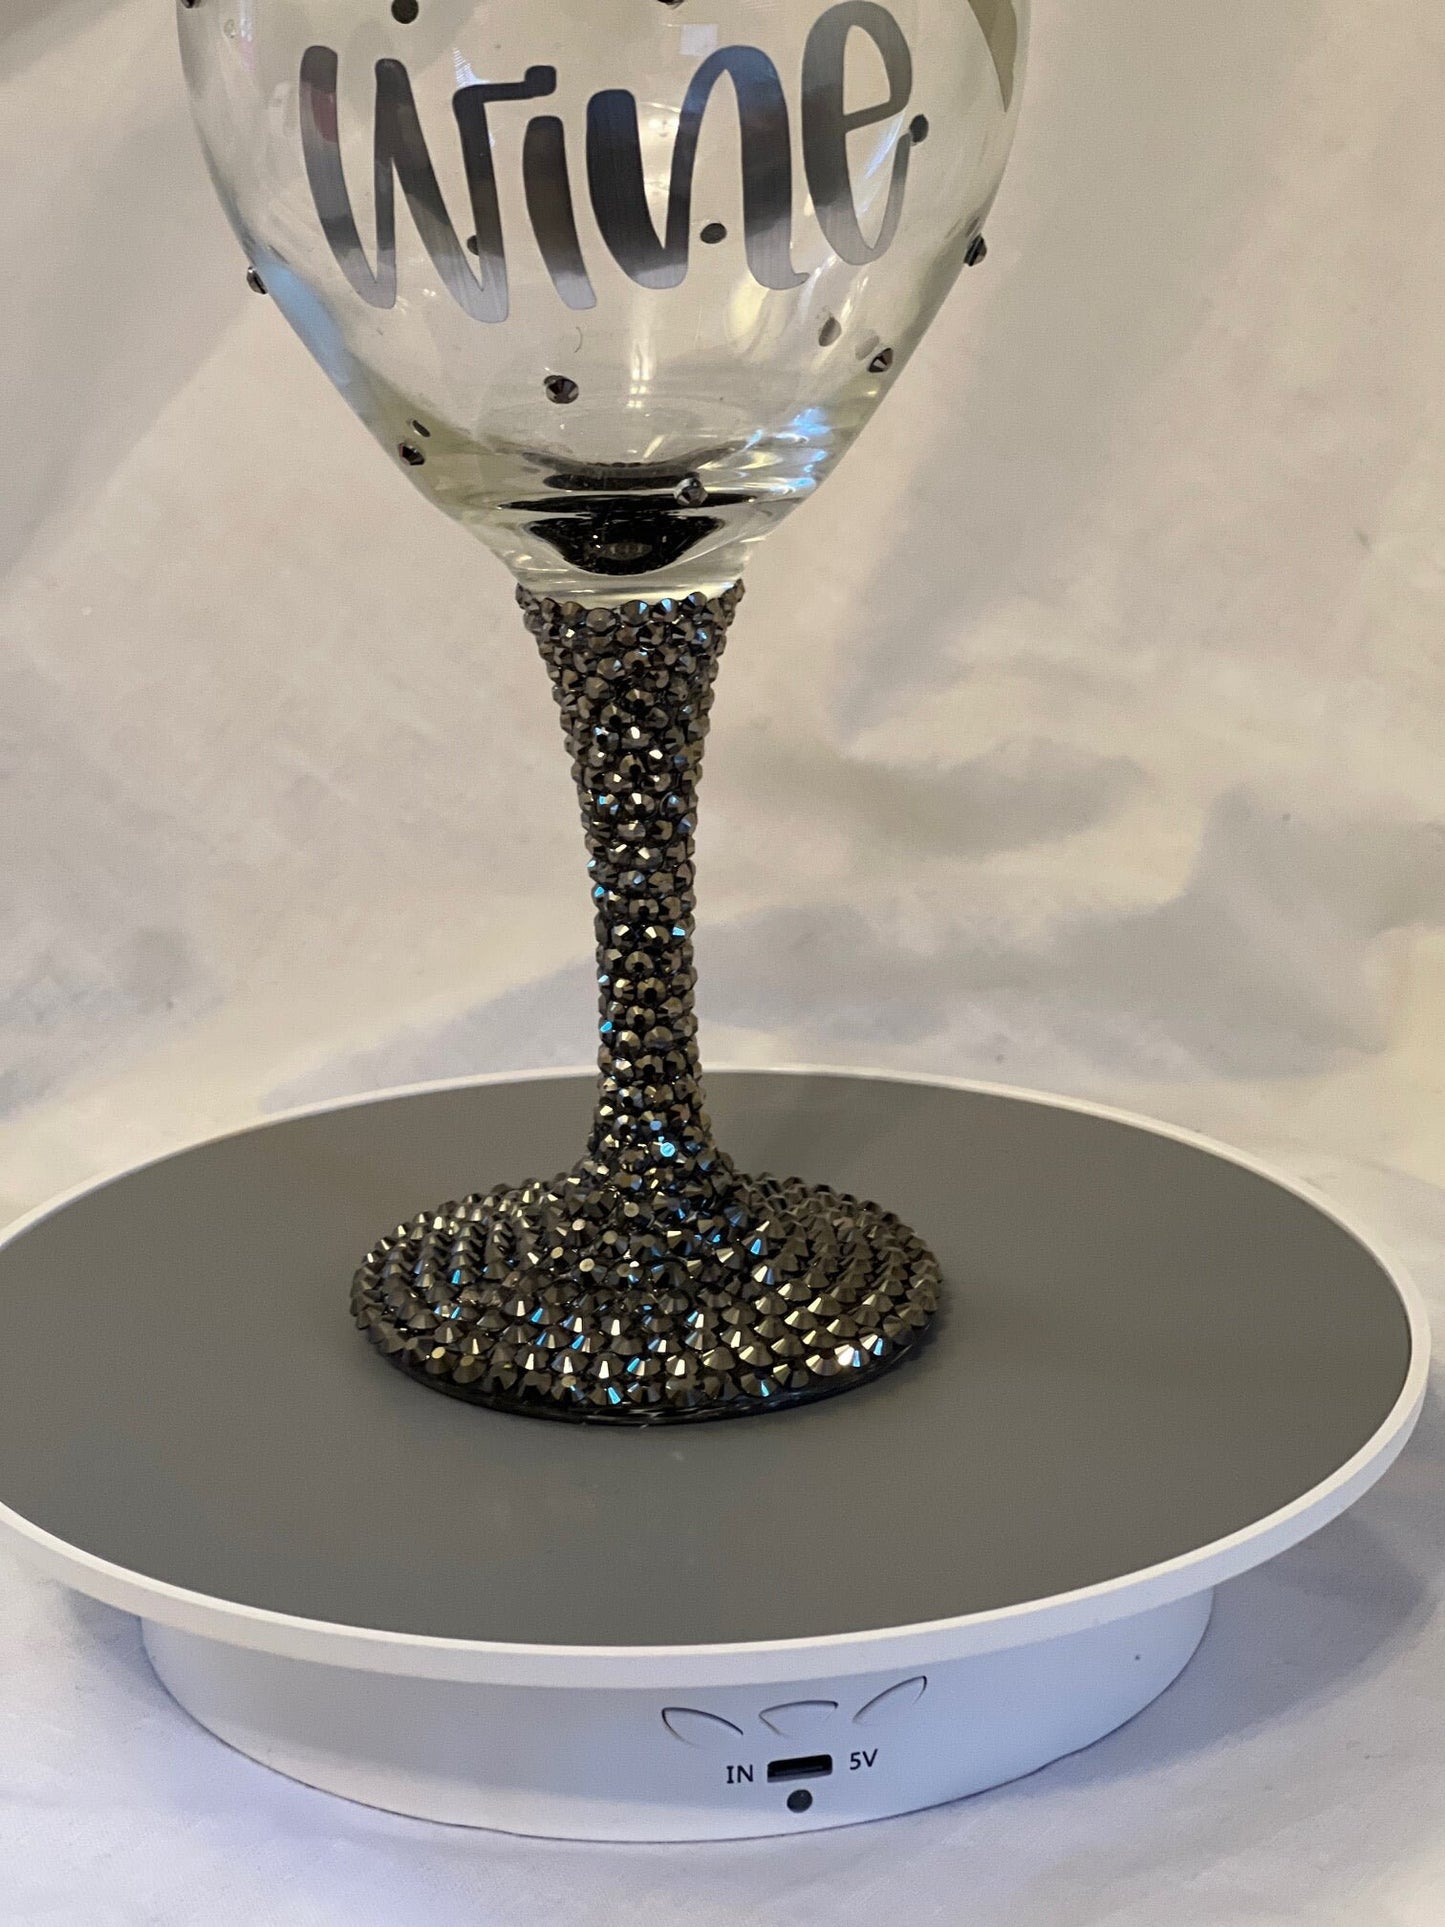 Rhinestone Wine Goblet, champagne flute, stemless wine glass, blinged Quinceanera, anniversary, wedding, Mother's Day, or bridesmaid gift